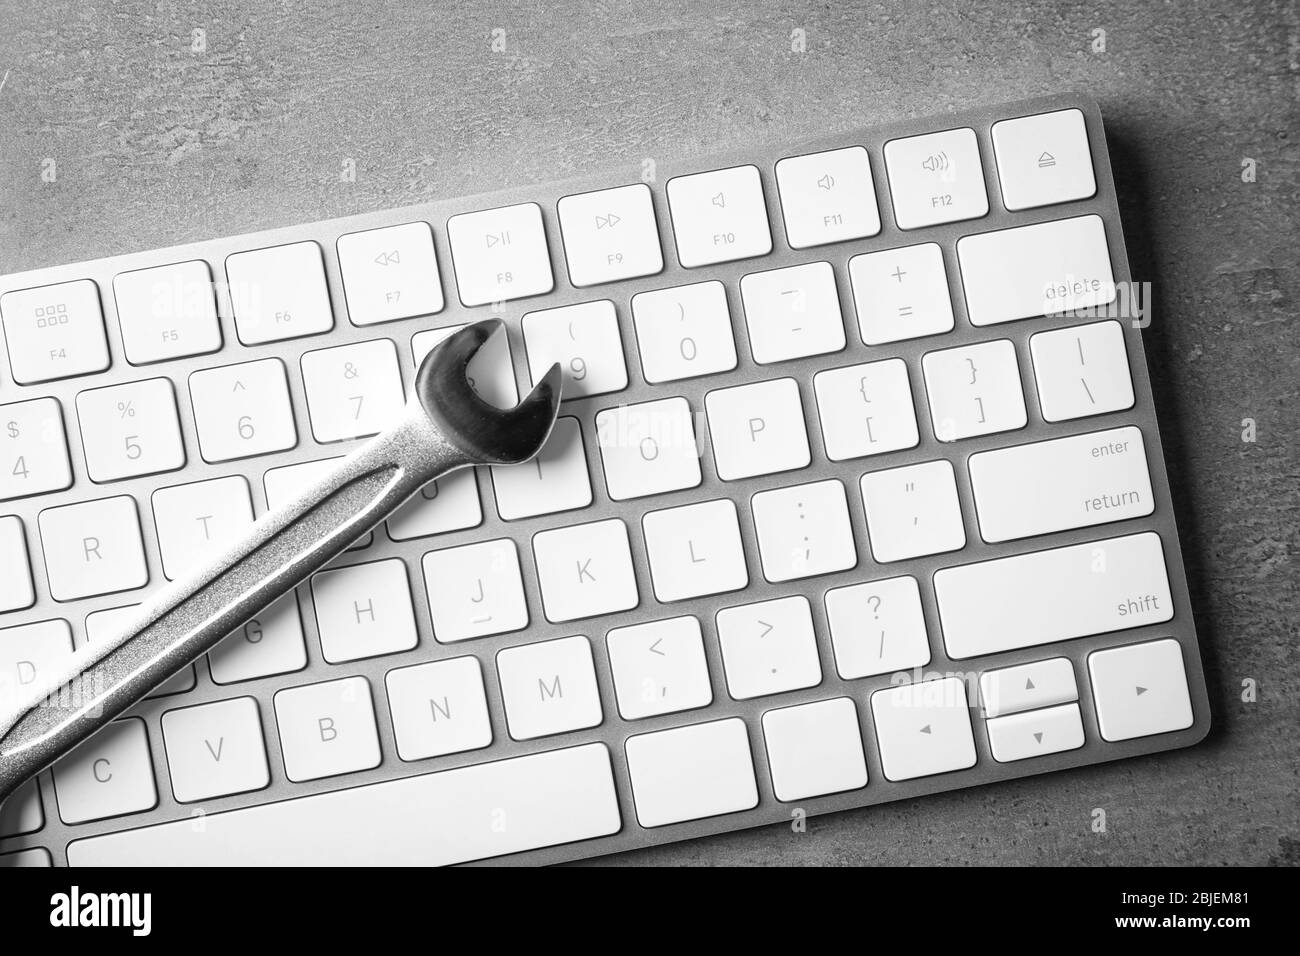 Modern wireless keyboard and spanner on gray background Stock Photo